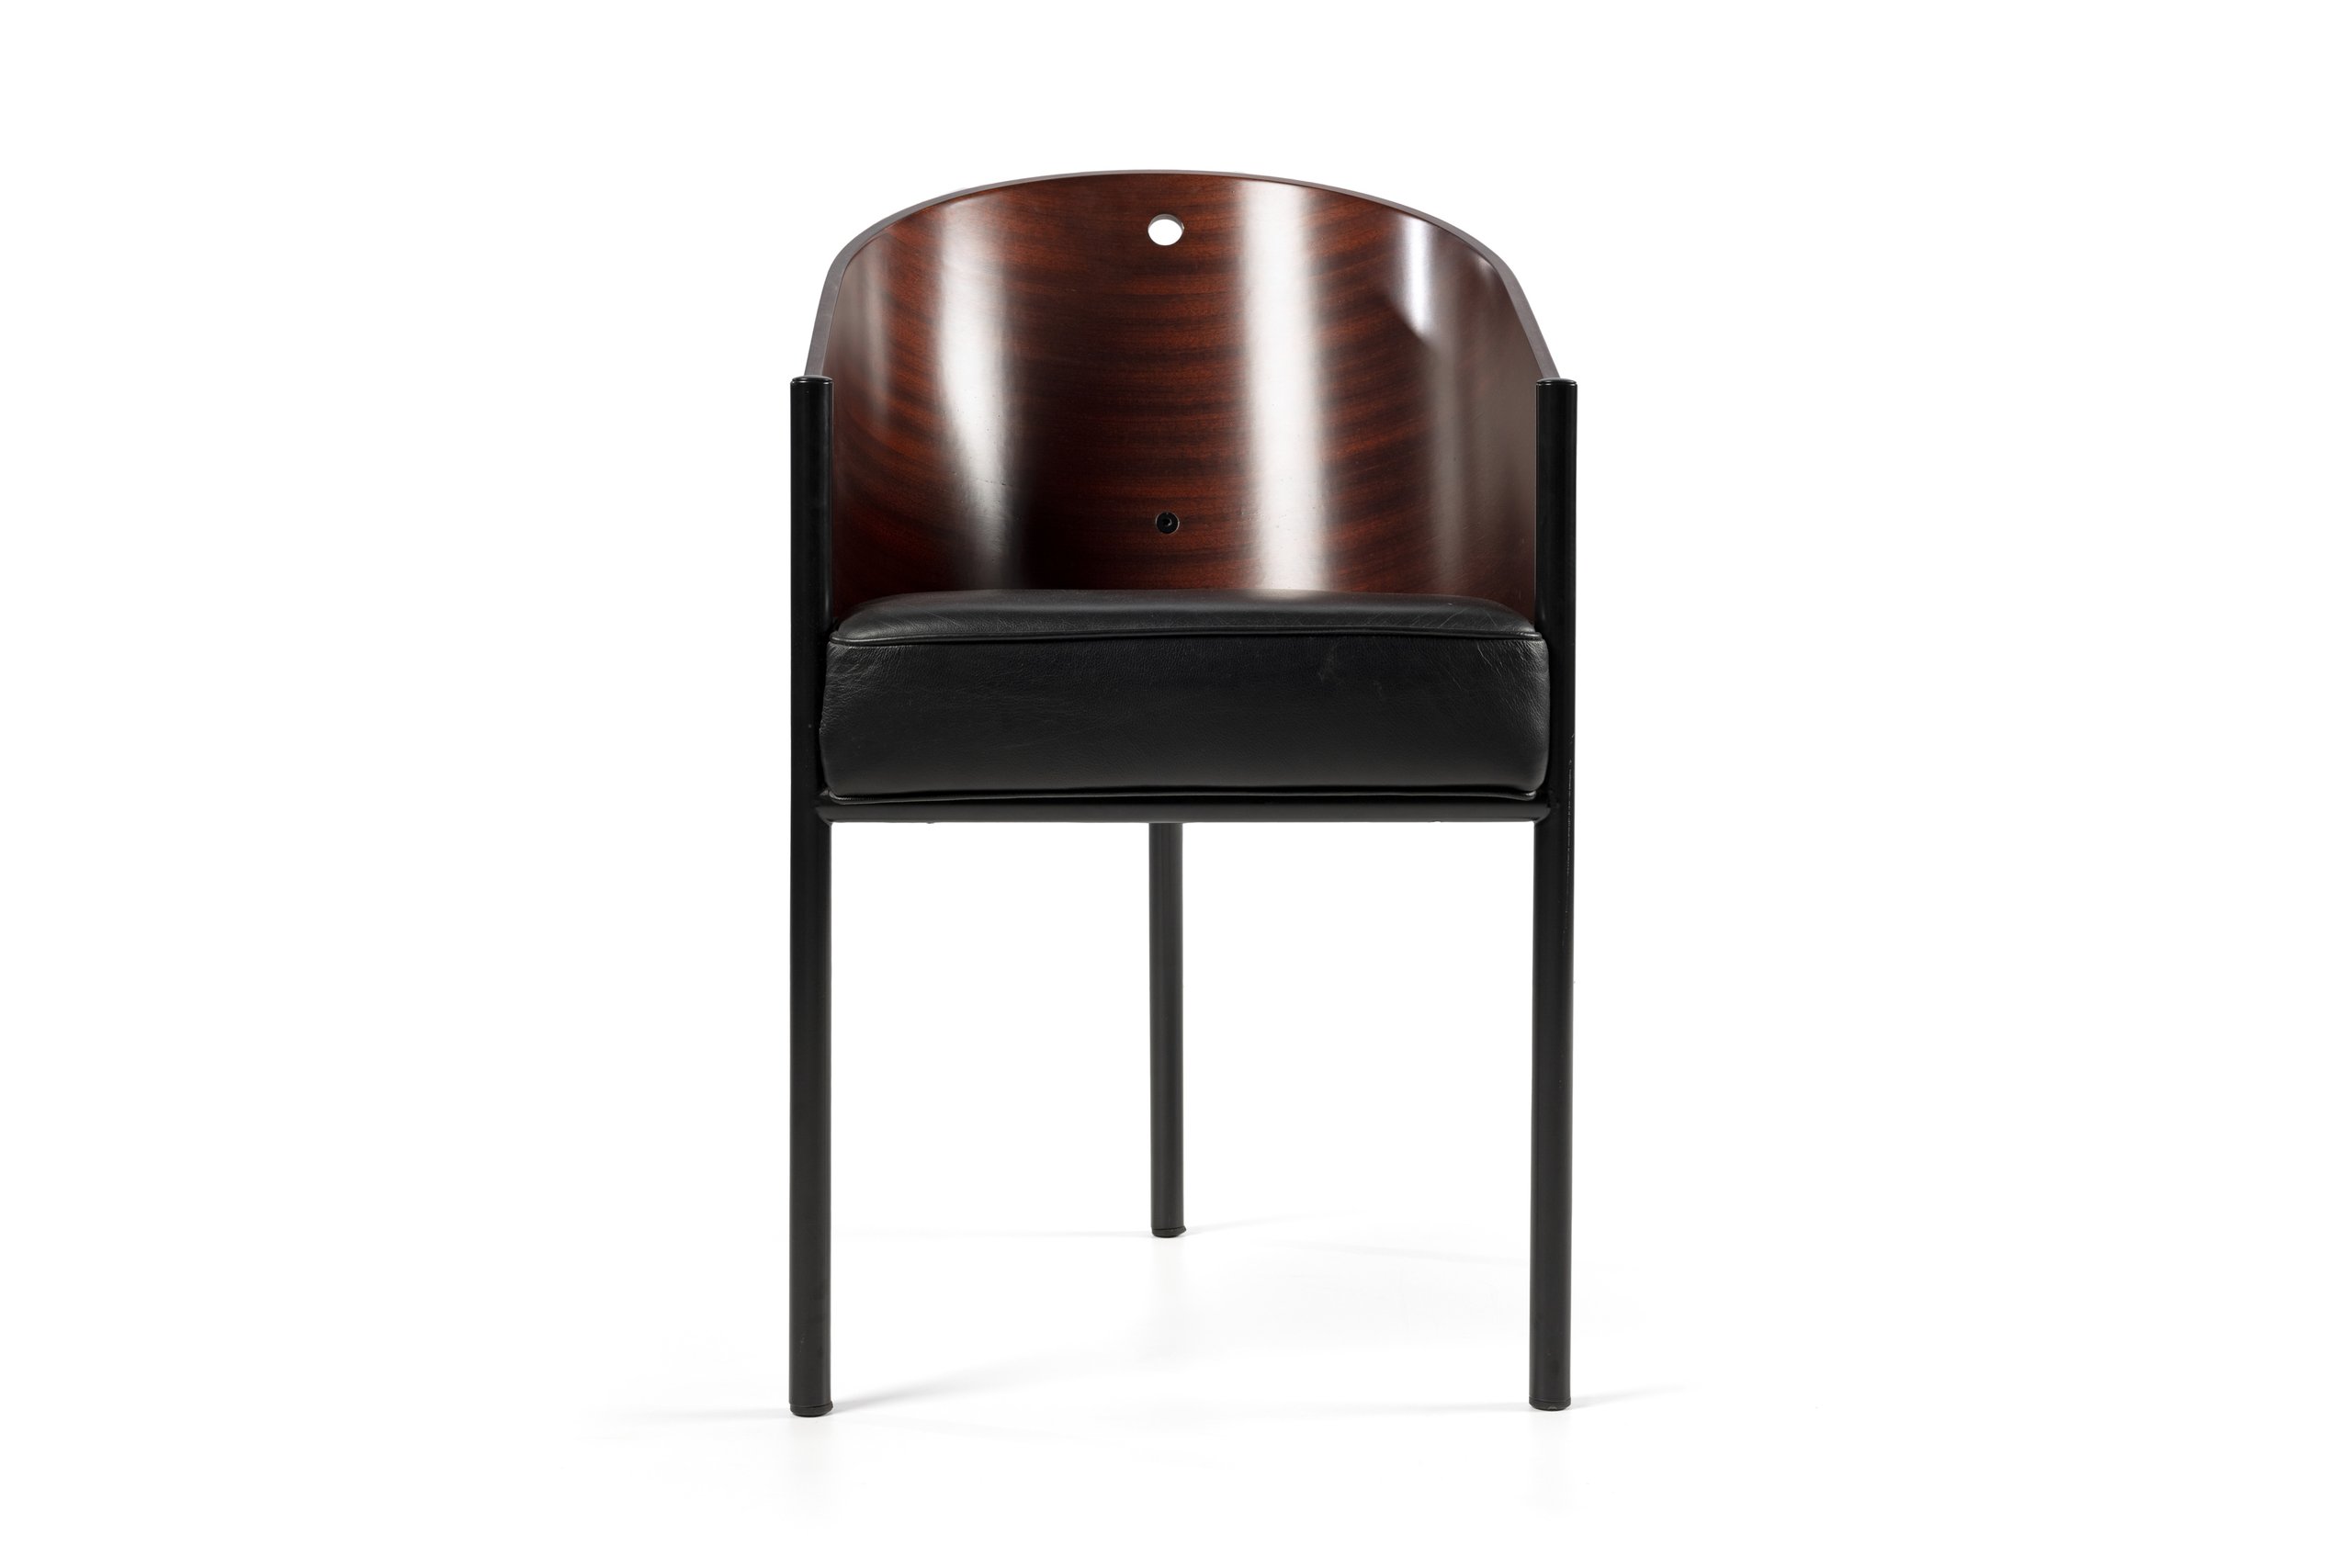 Cafe Costes chair by Philippe Starck